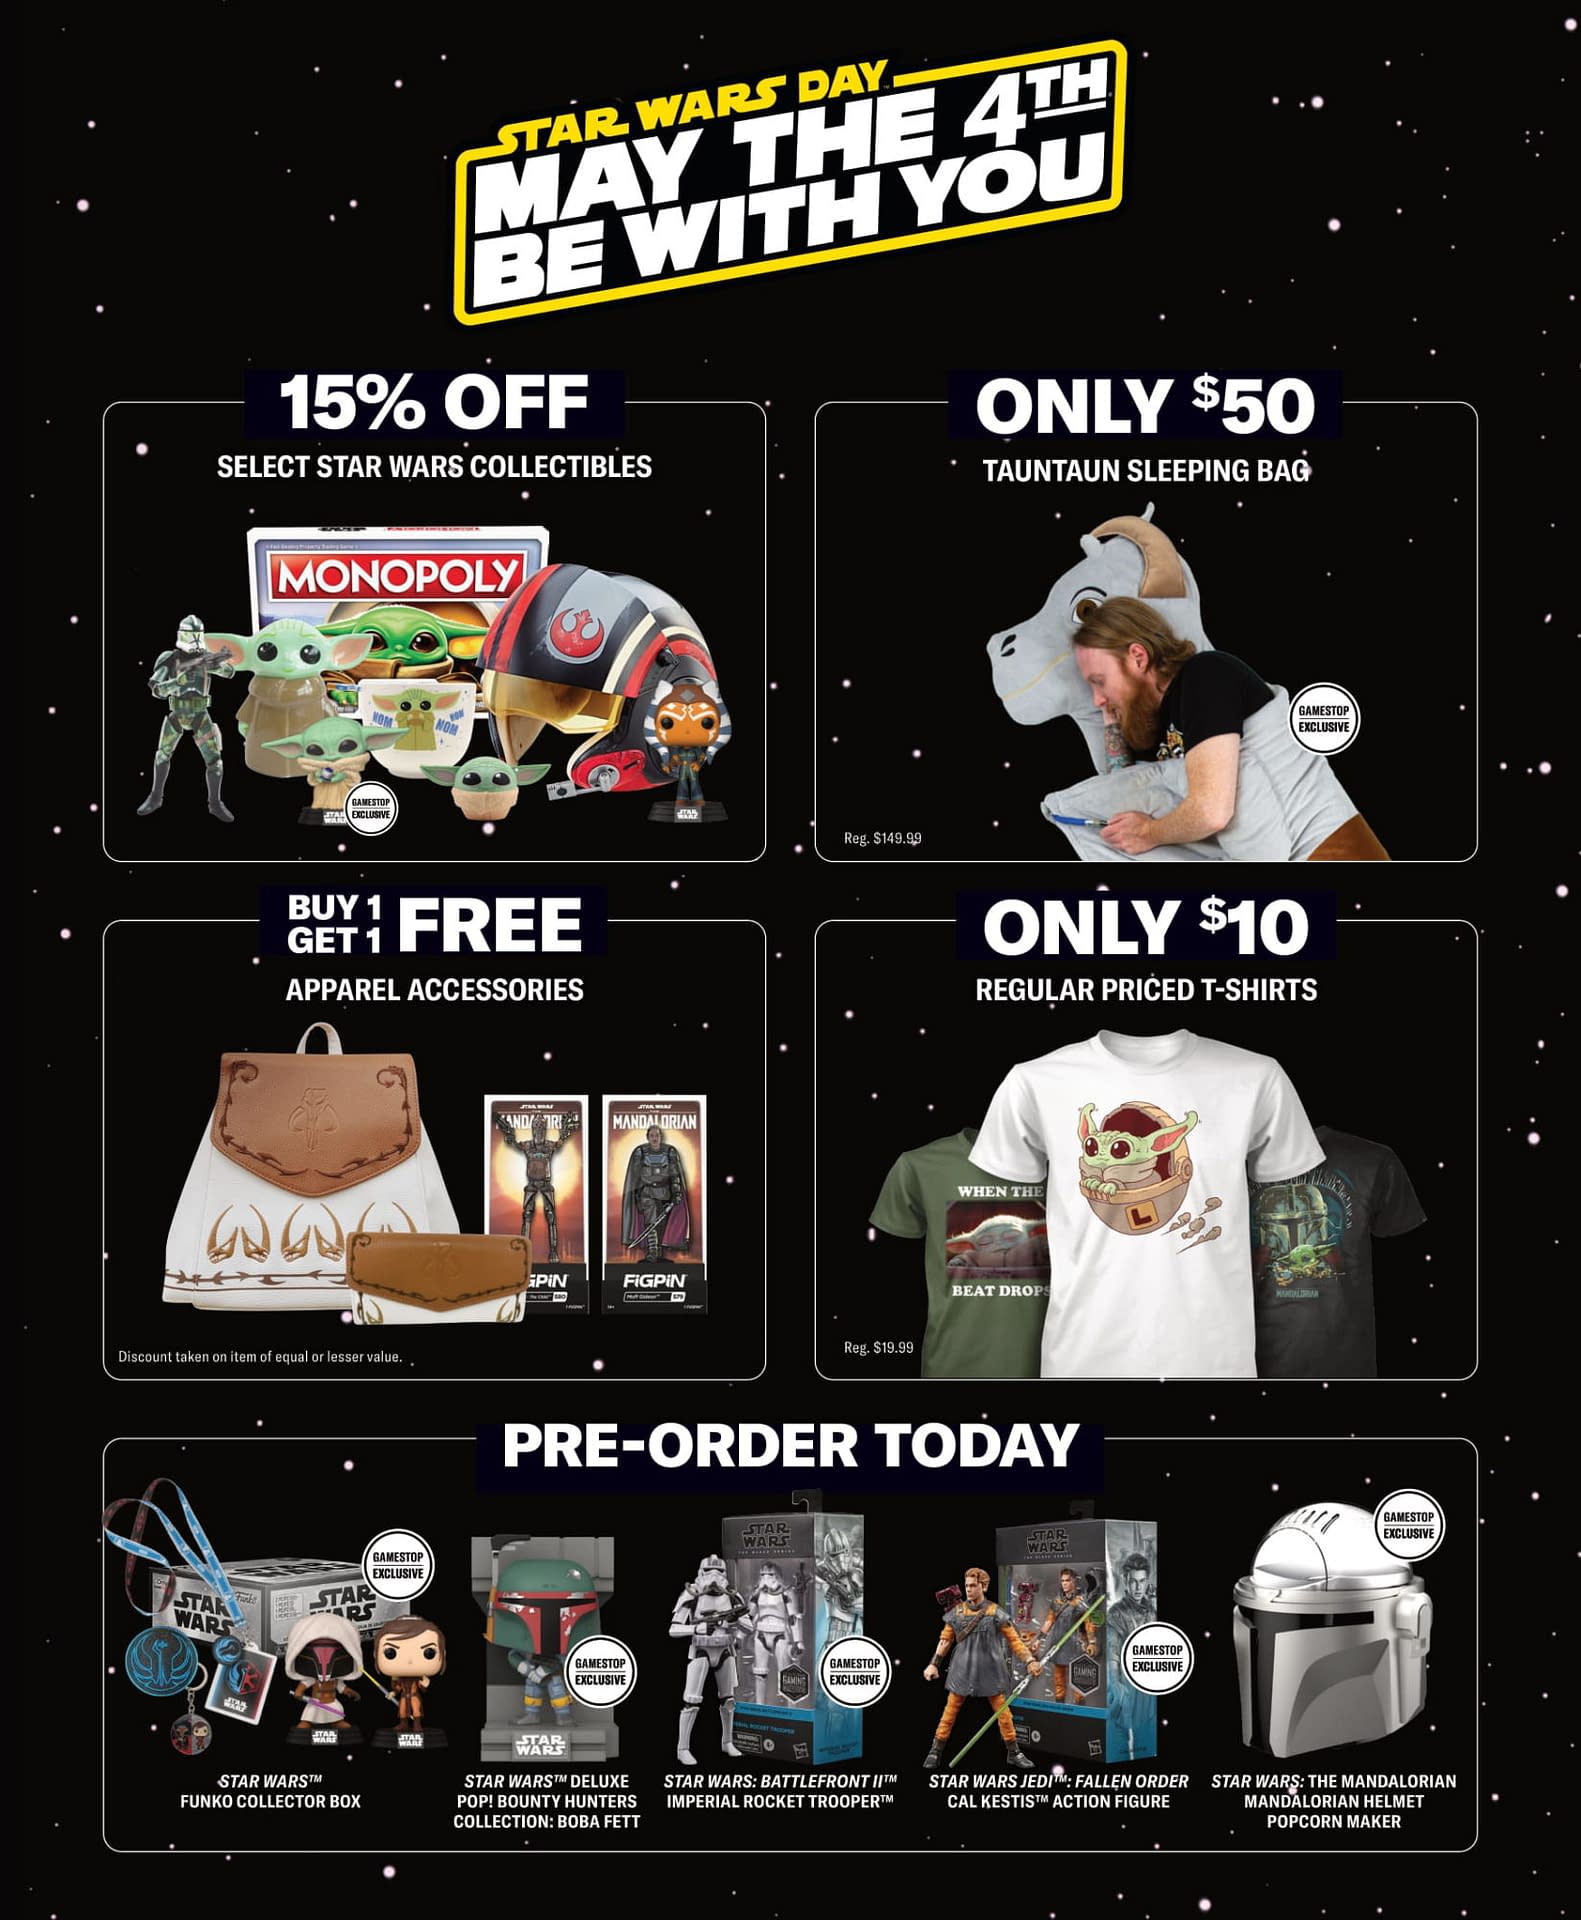 Hosts "May 4th" Sale Star Wars Day